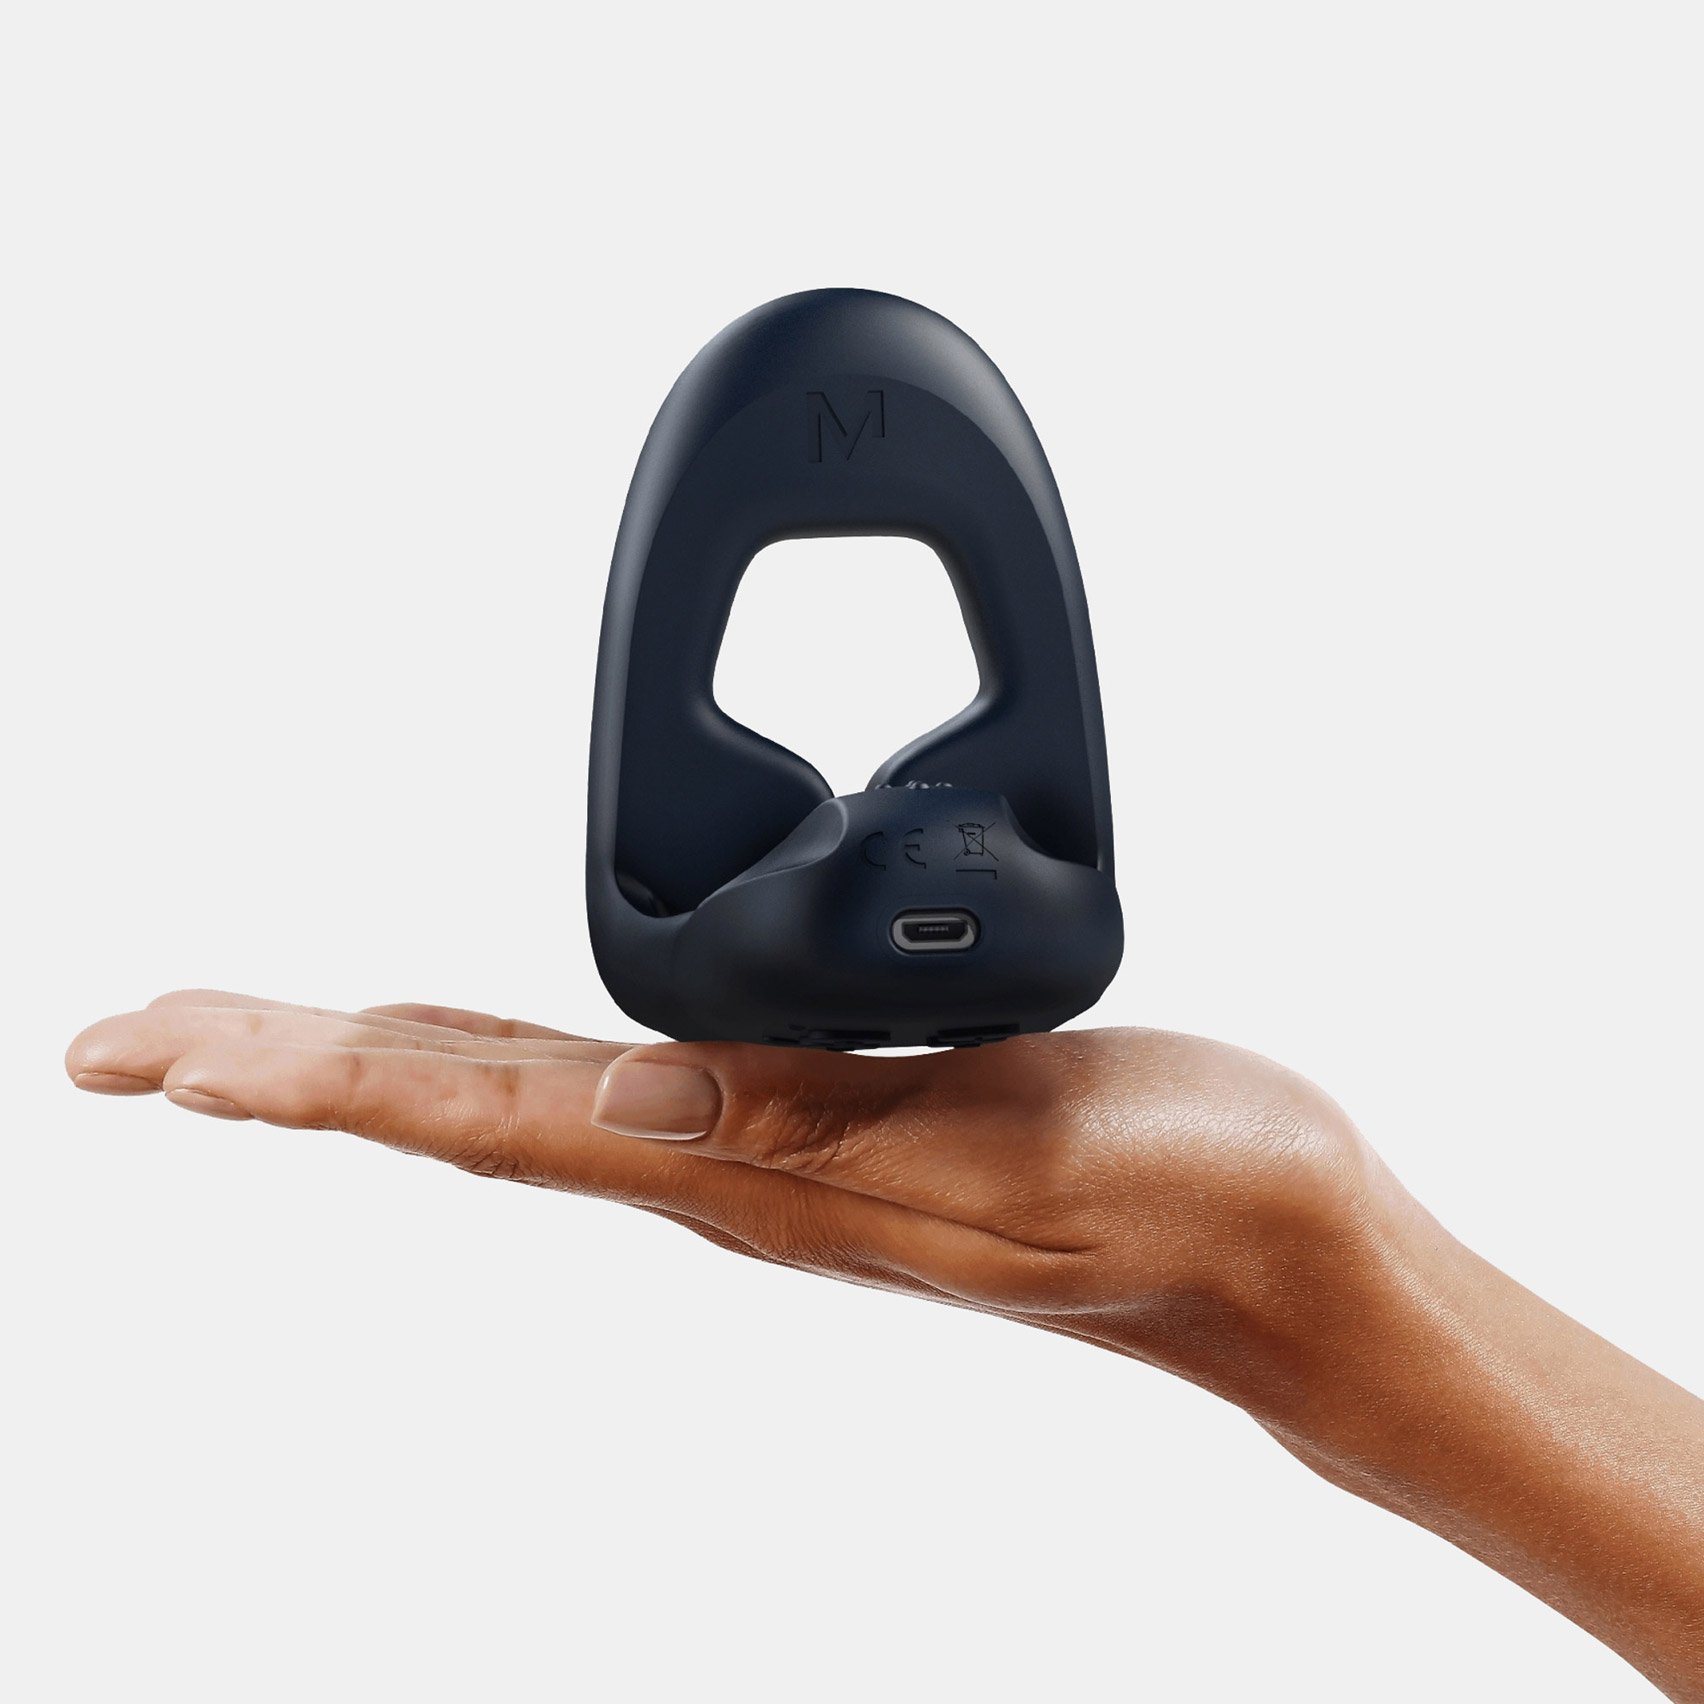 Tenuto 2 is a wearable vibrator designed to tackle erectile dysfunction picture